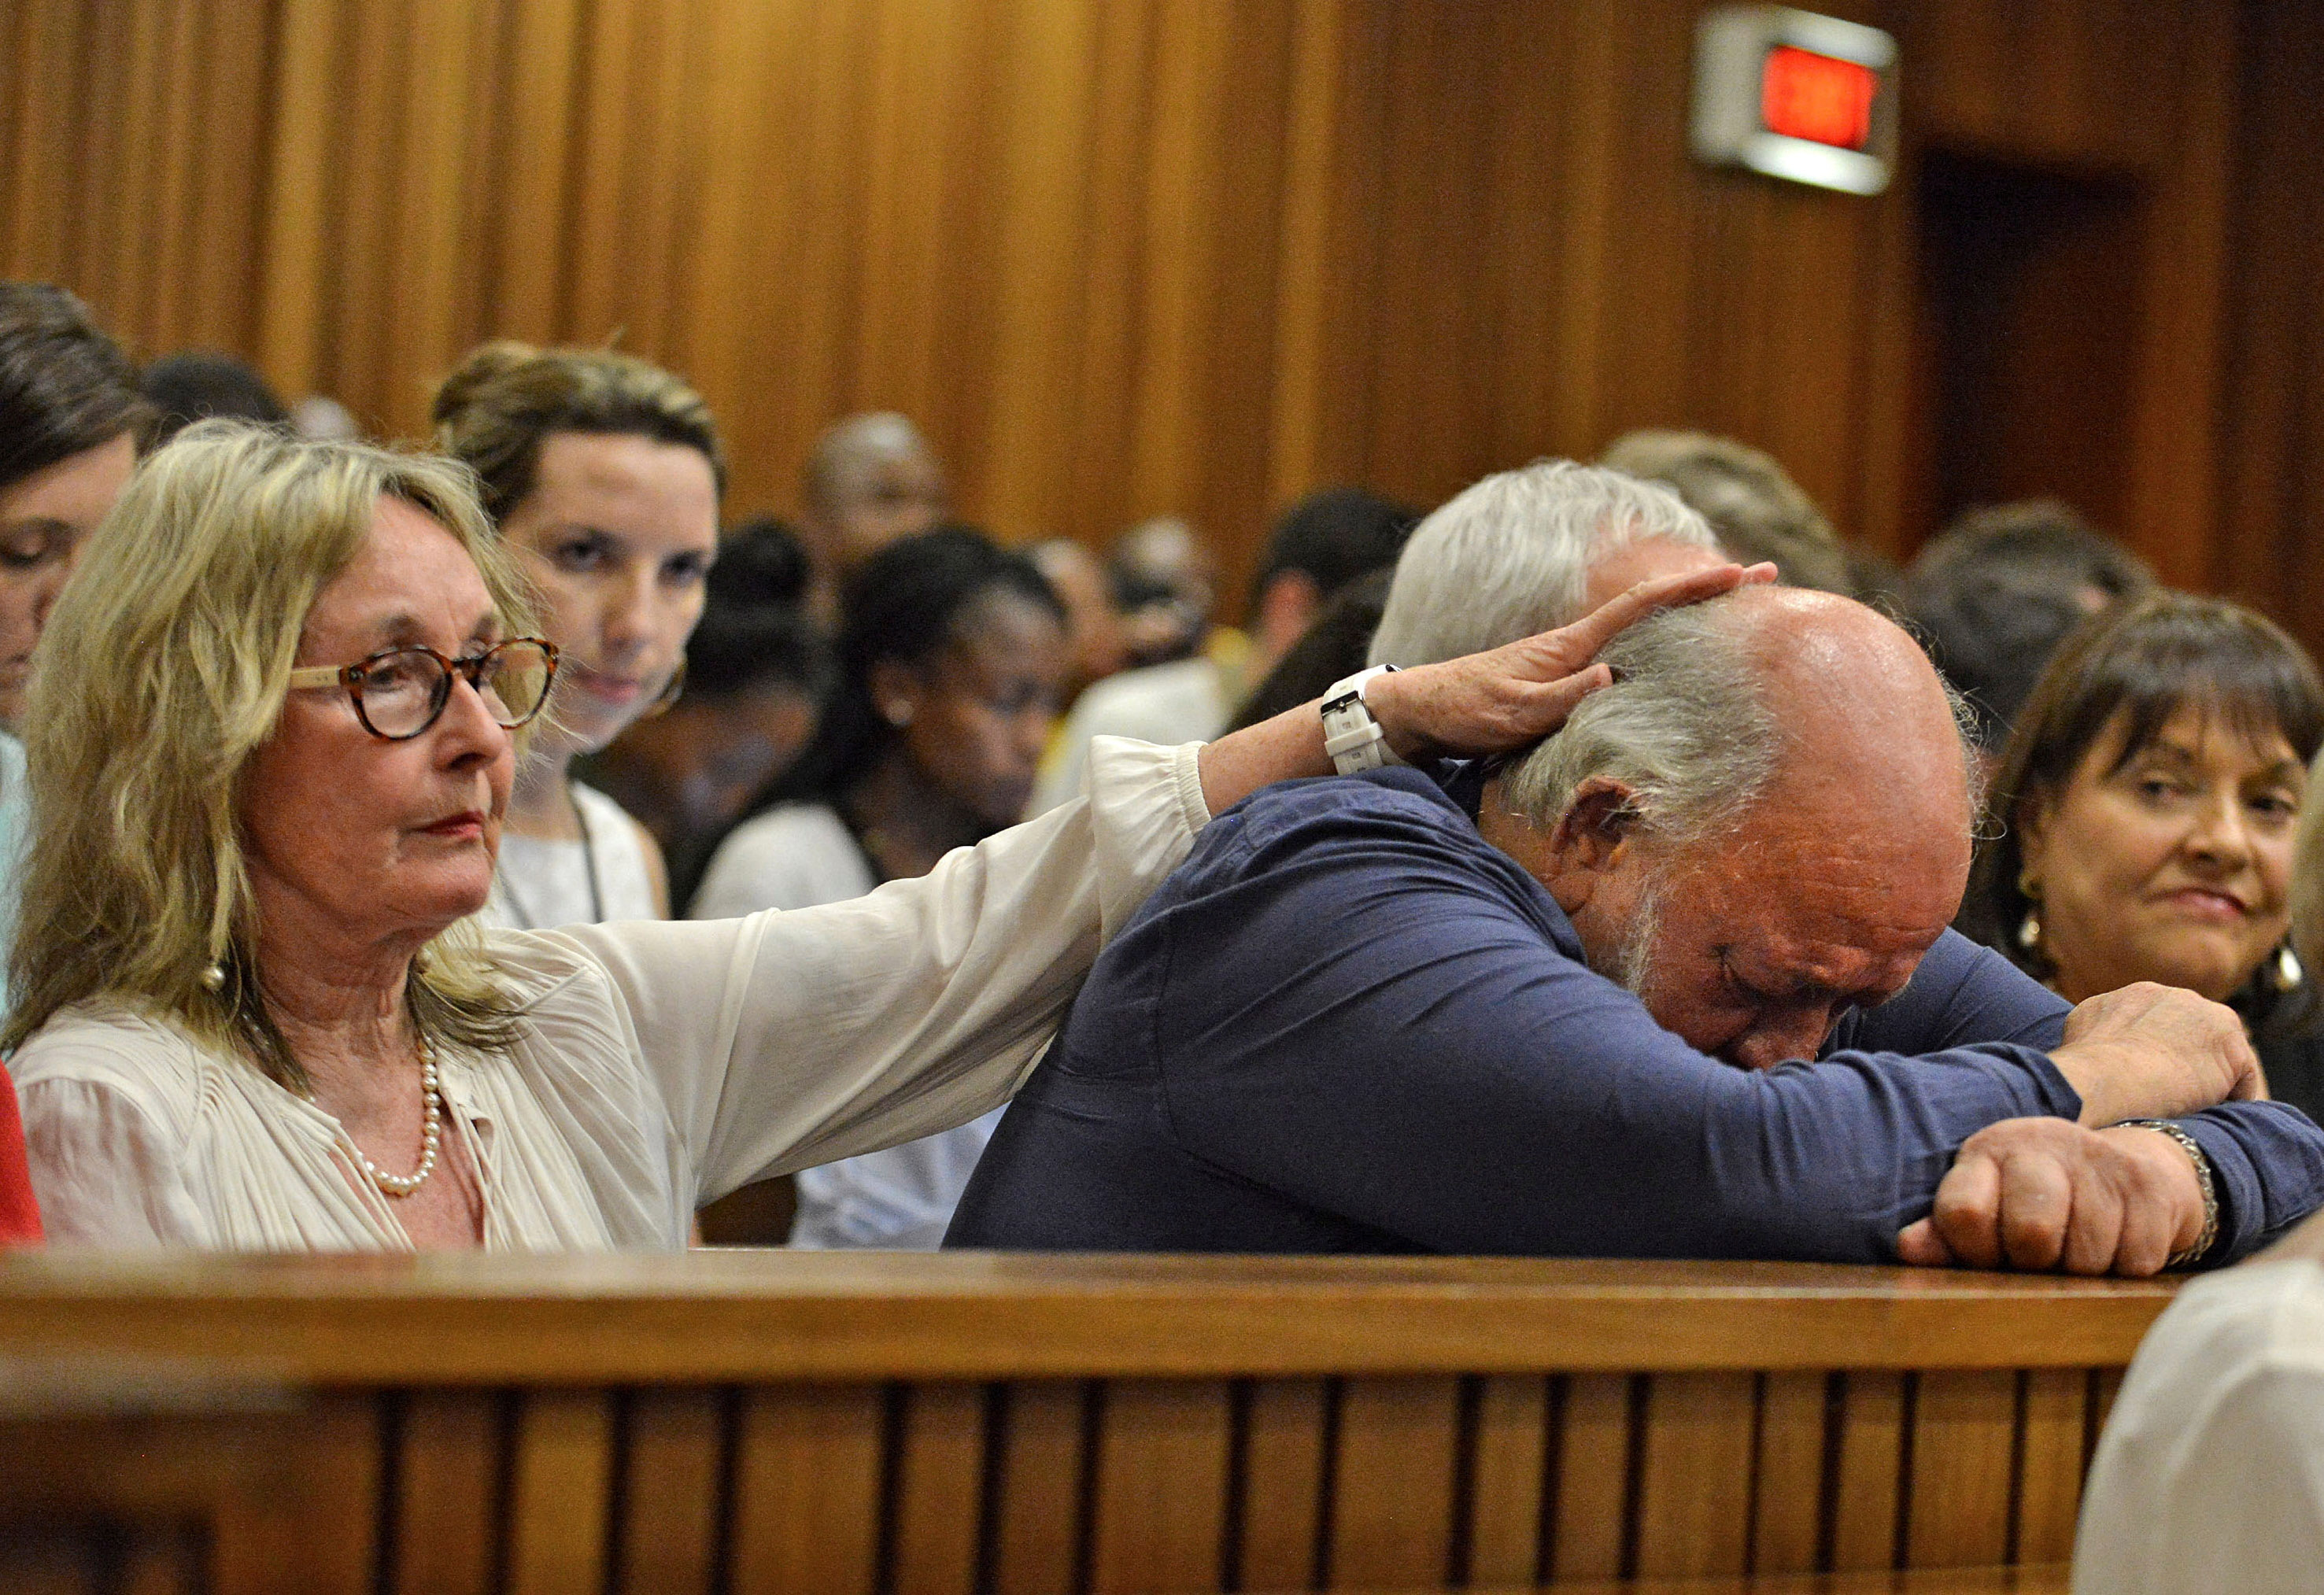 Barry Steenkamp is consoled by his wife during the sentencing hearing of Pistorius at the North Gauteng High Court in Pretoria